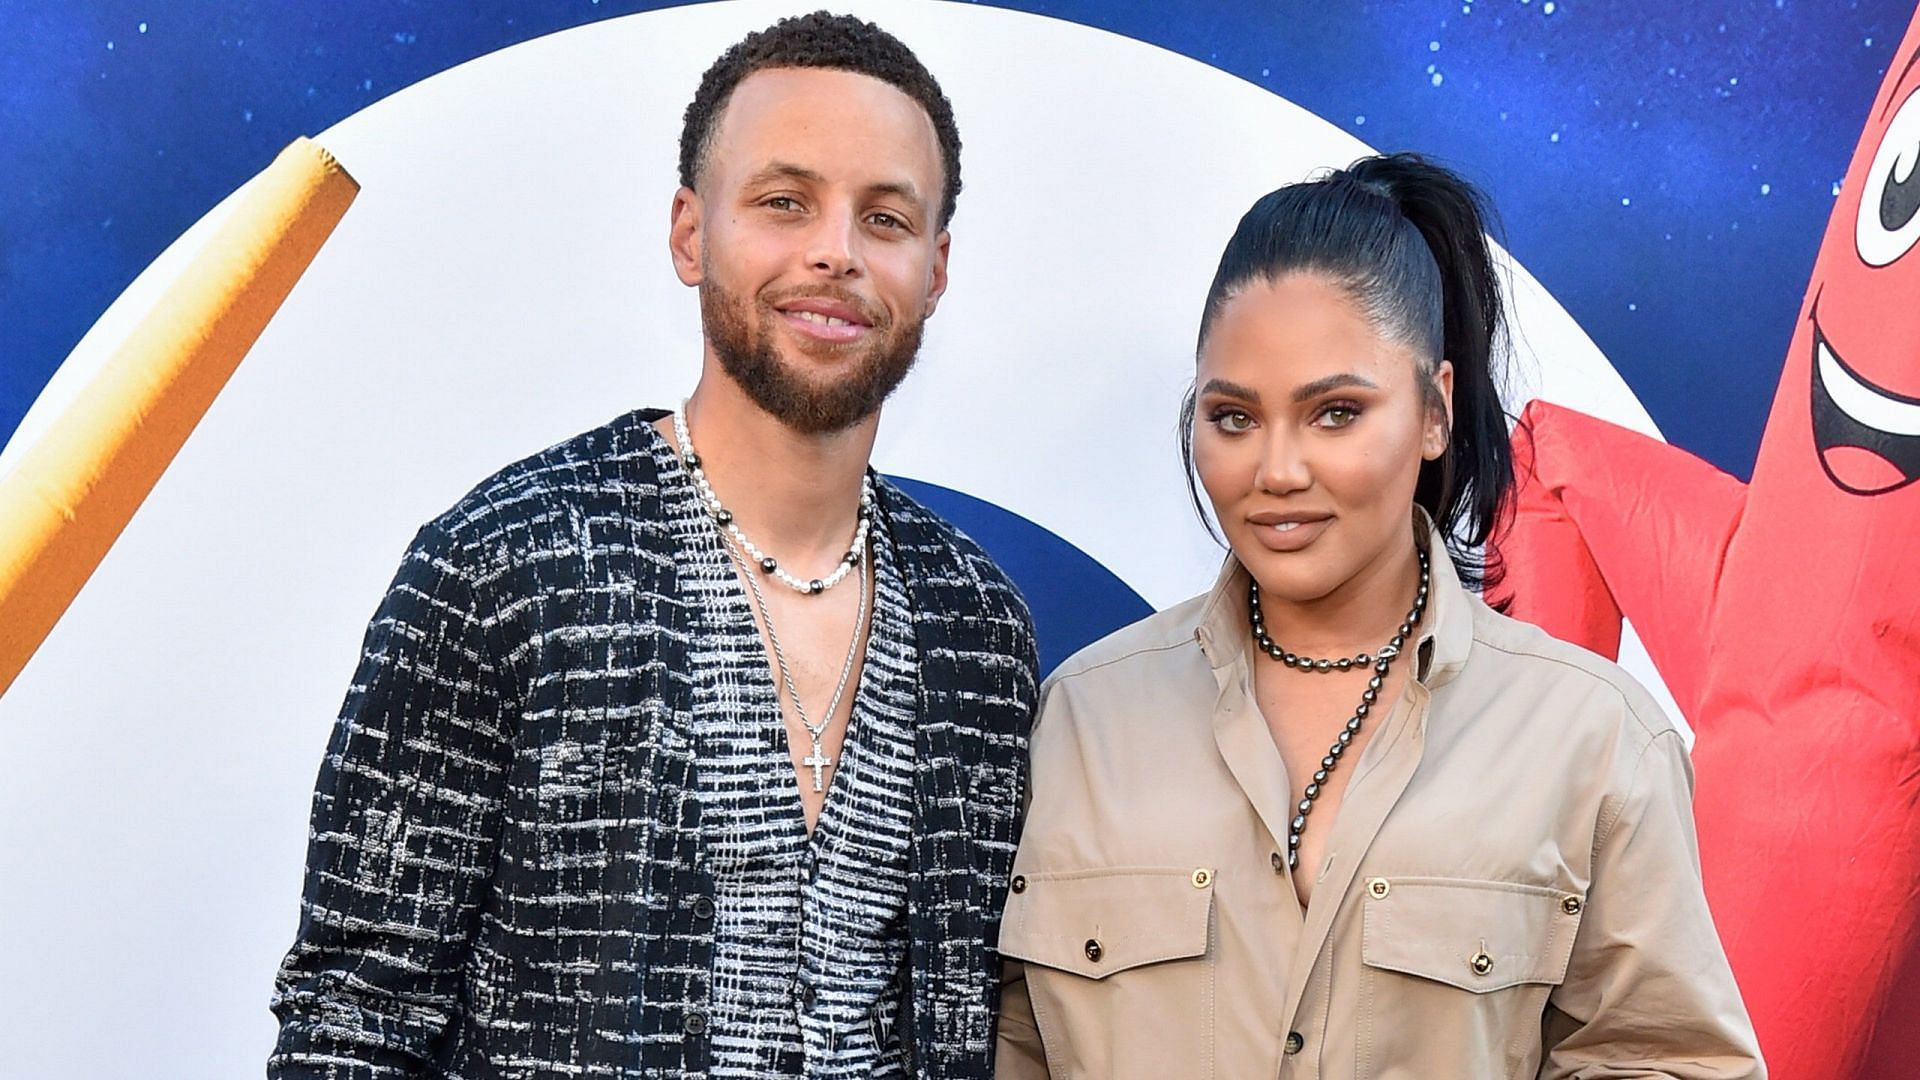 Golden State Warriors superstar point guard Steph Curry and his wife Ayesha Curry